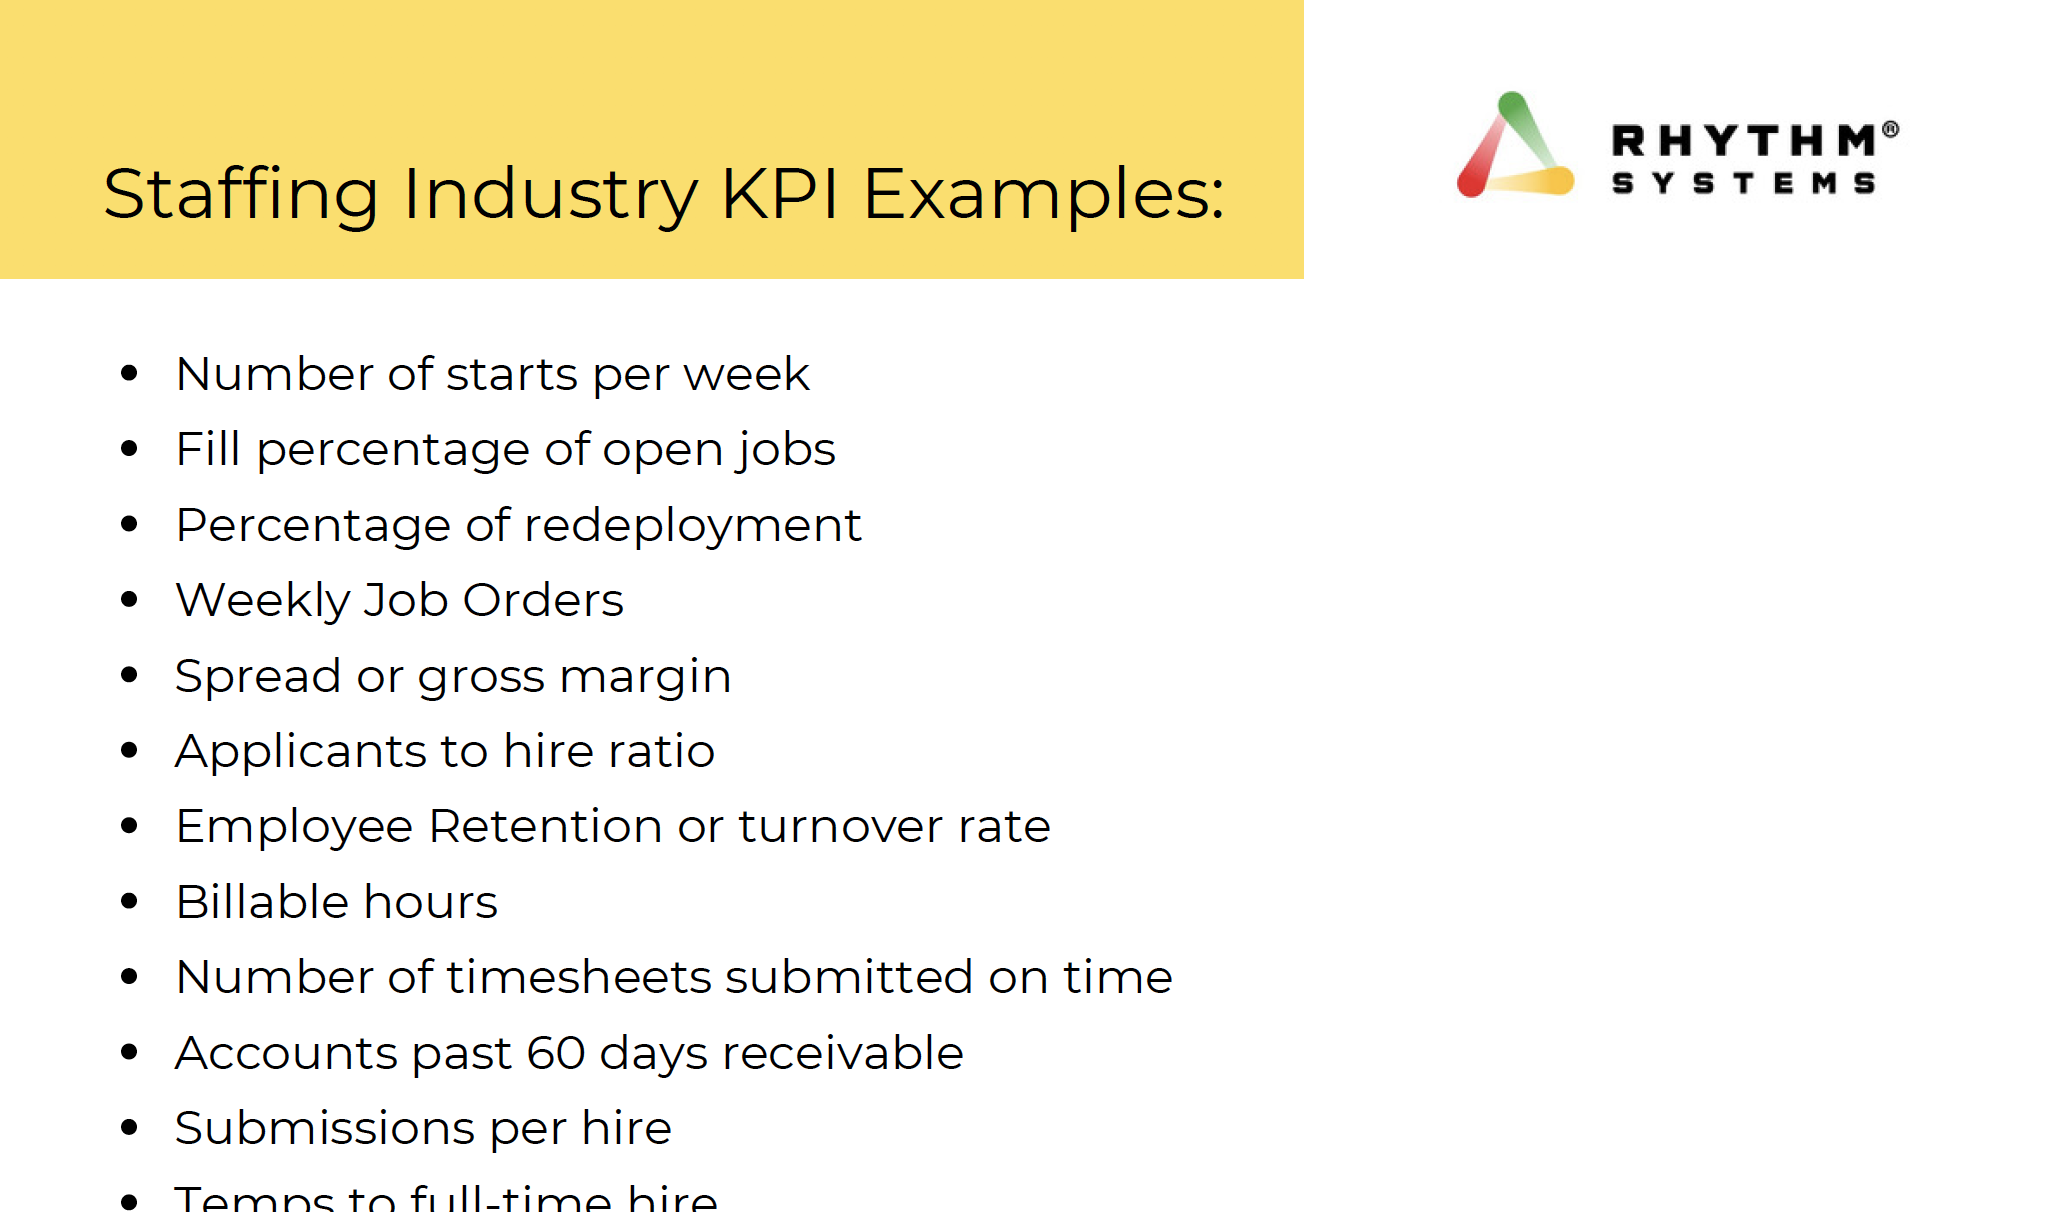 KPI Staffing examples